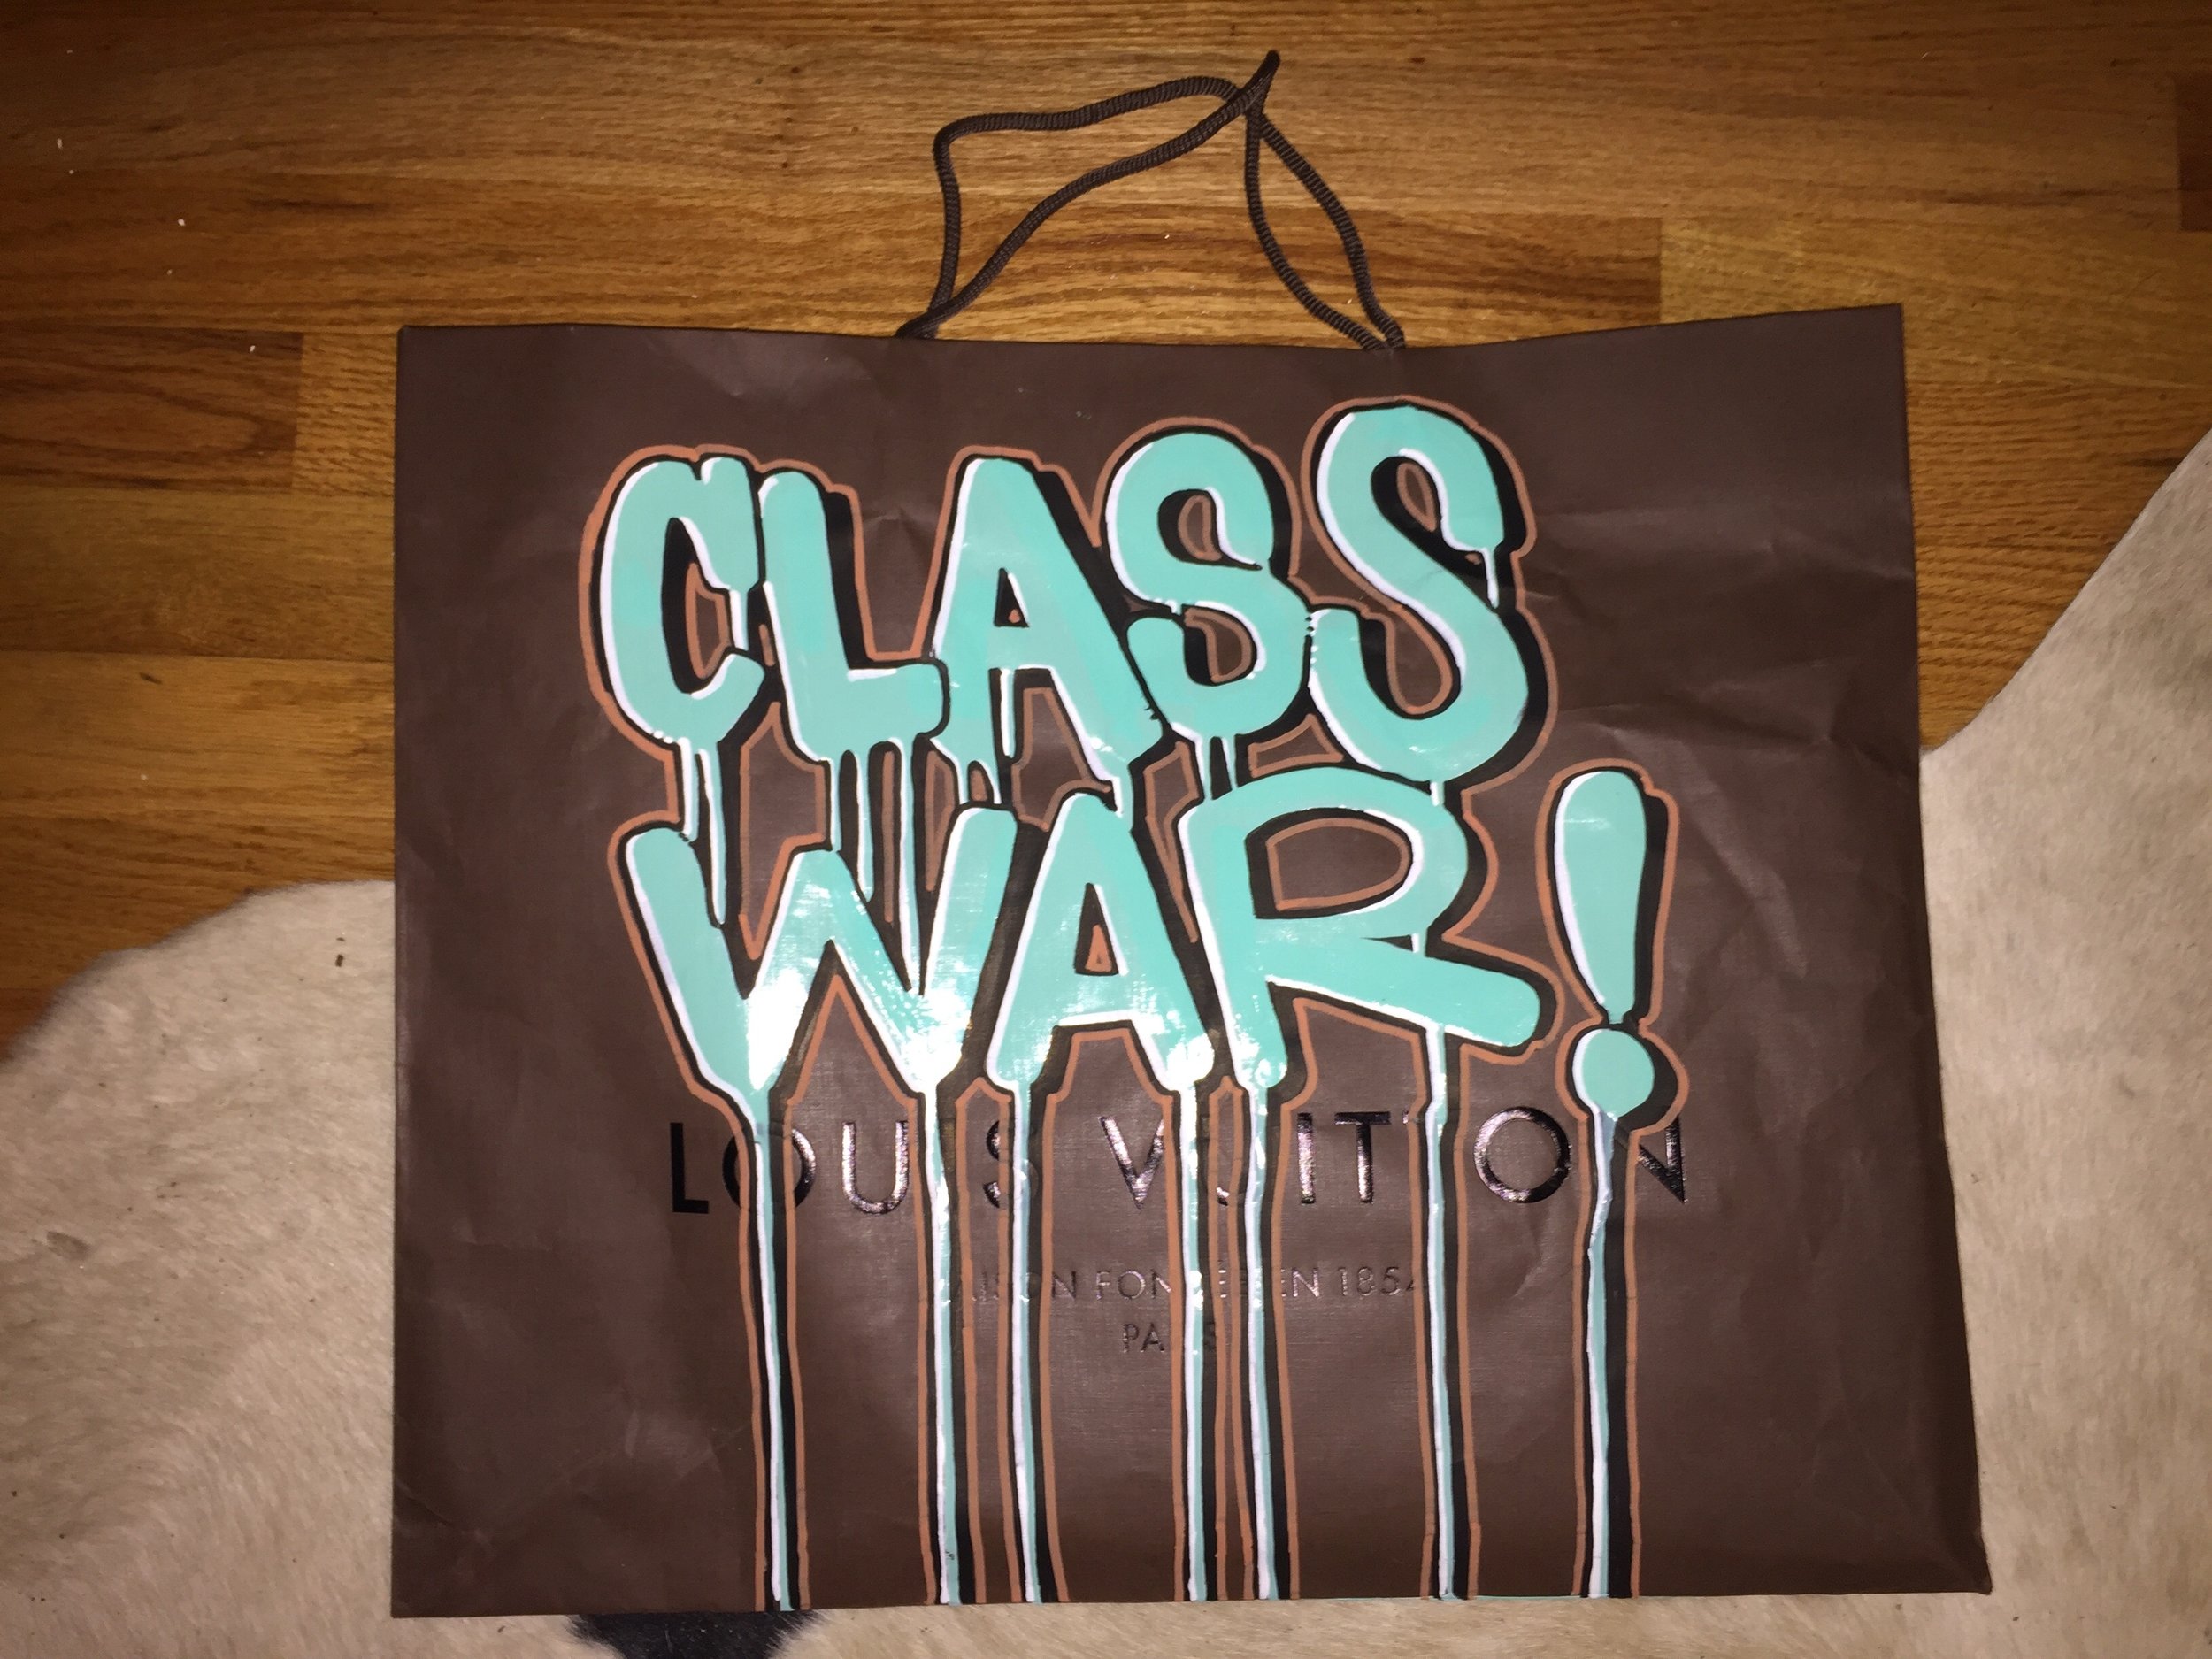  CLASS WAR, 2015  Enamel-based ink, oil-based ink and water-based ink on authentic Louis Vuitton shopping bag 